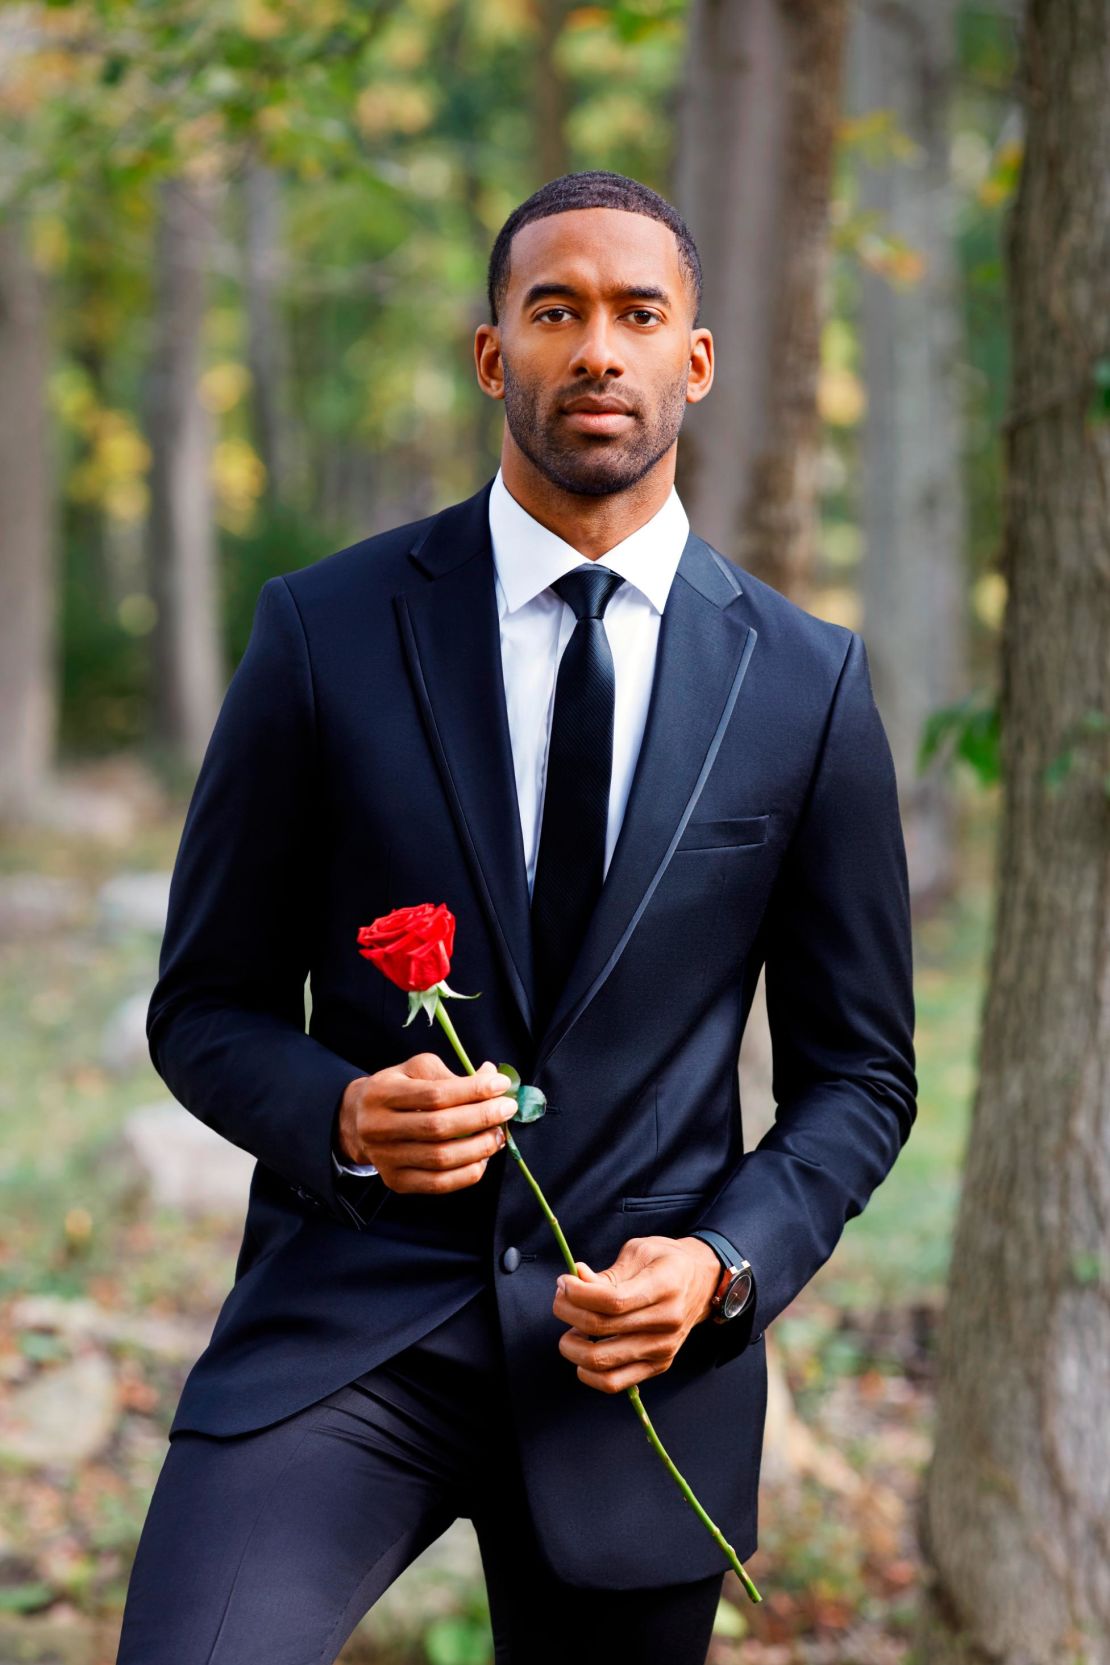 Matt James of New York City is the first Black lead of "The Bachelor."